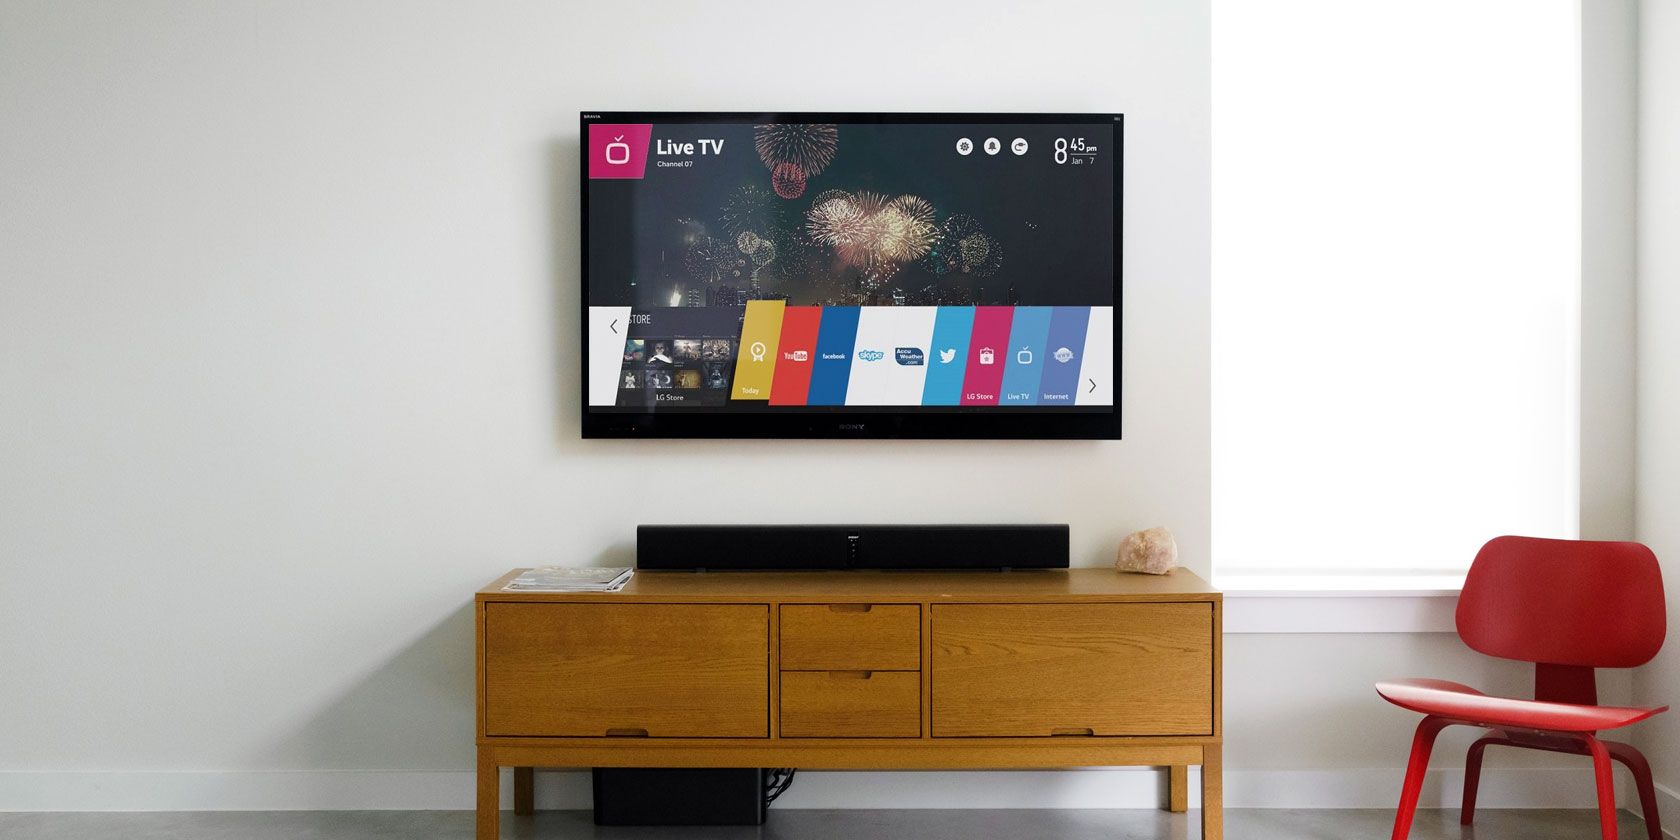 What Is the Best Smart TV Operating System?